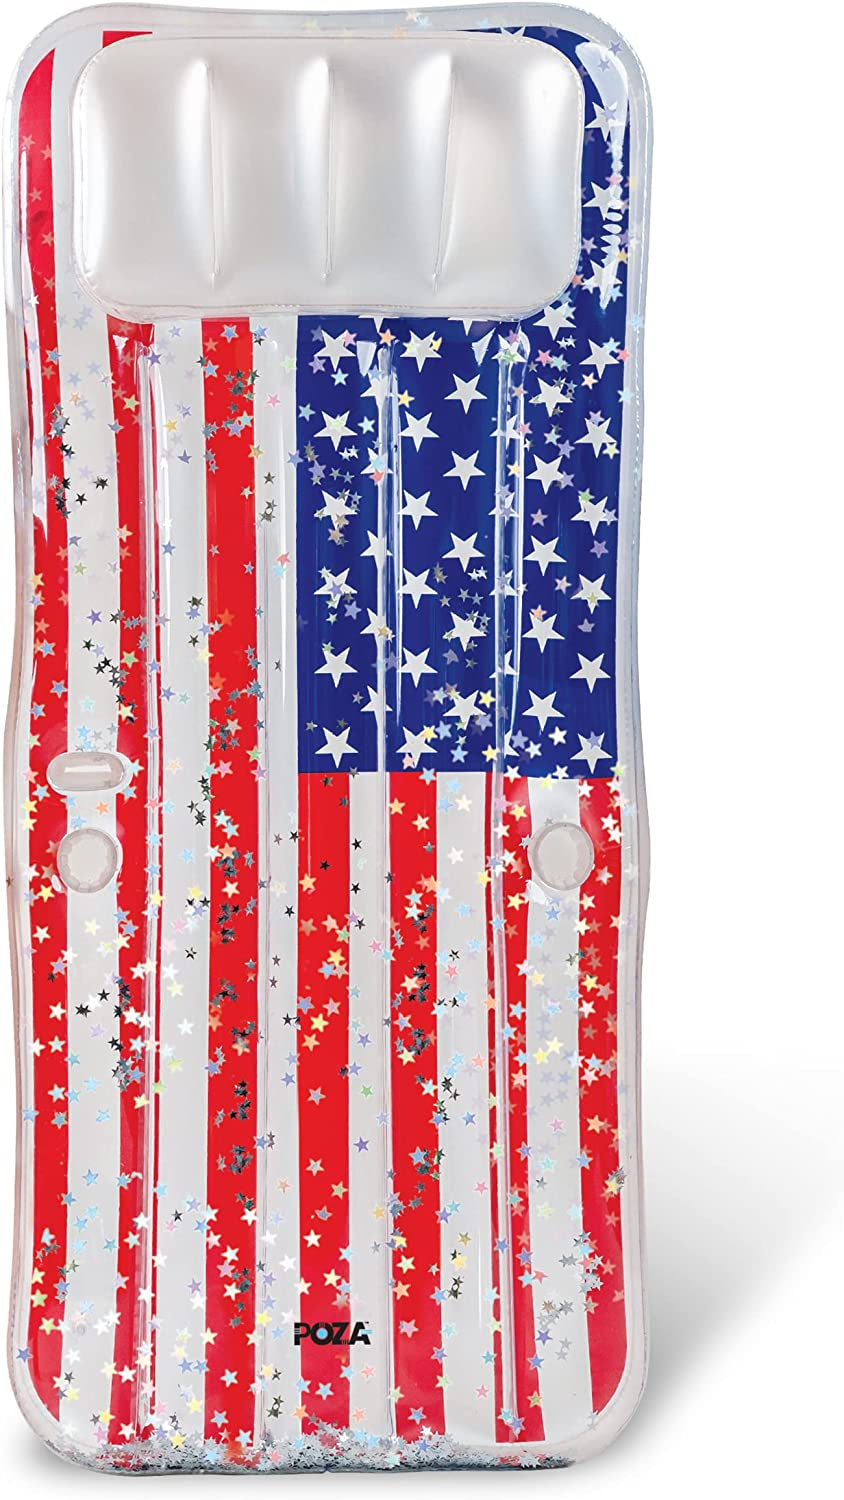 Inflatable USA Pool Float - Luxurious Fun Lounger Filled with Sparkle Silver Stars Confetti, Cool USA Flag Design Water Swimming Pool Floaties for Beach, Lake & Pool